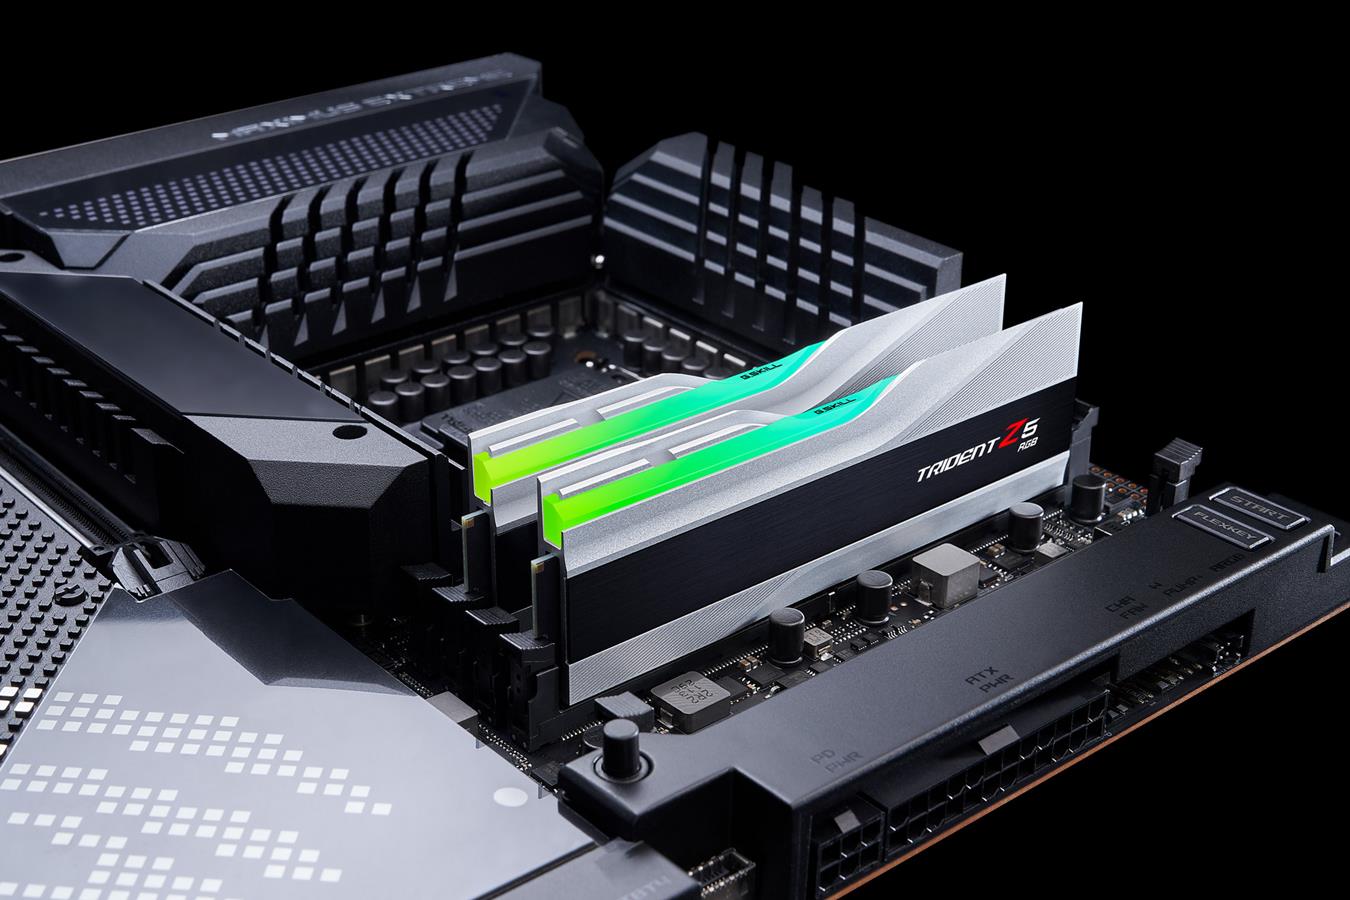 G.Skill expands the Trident Z5 family with a new high-performance DDR5 kit